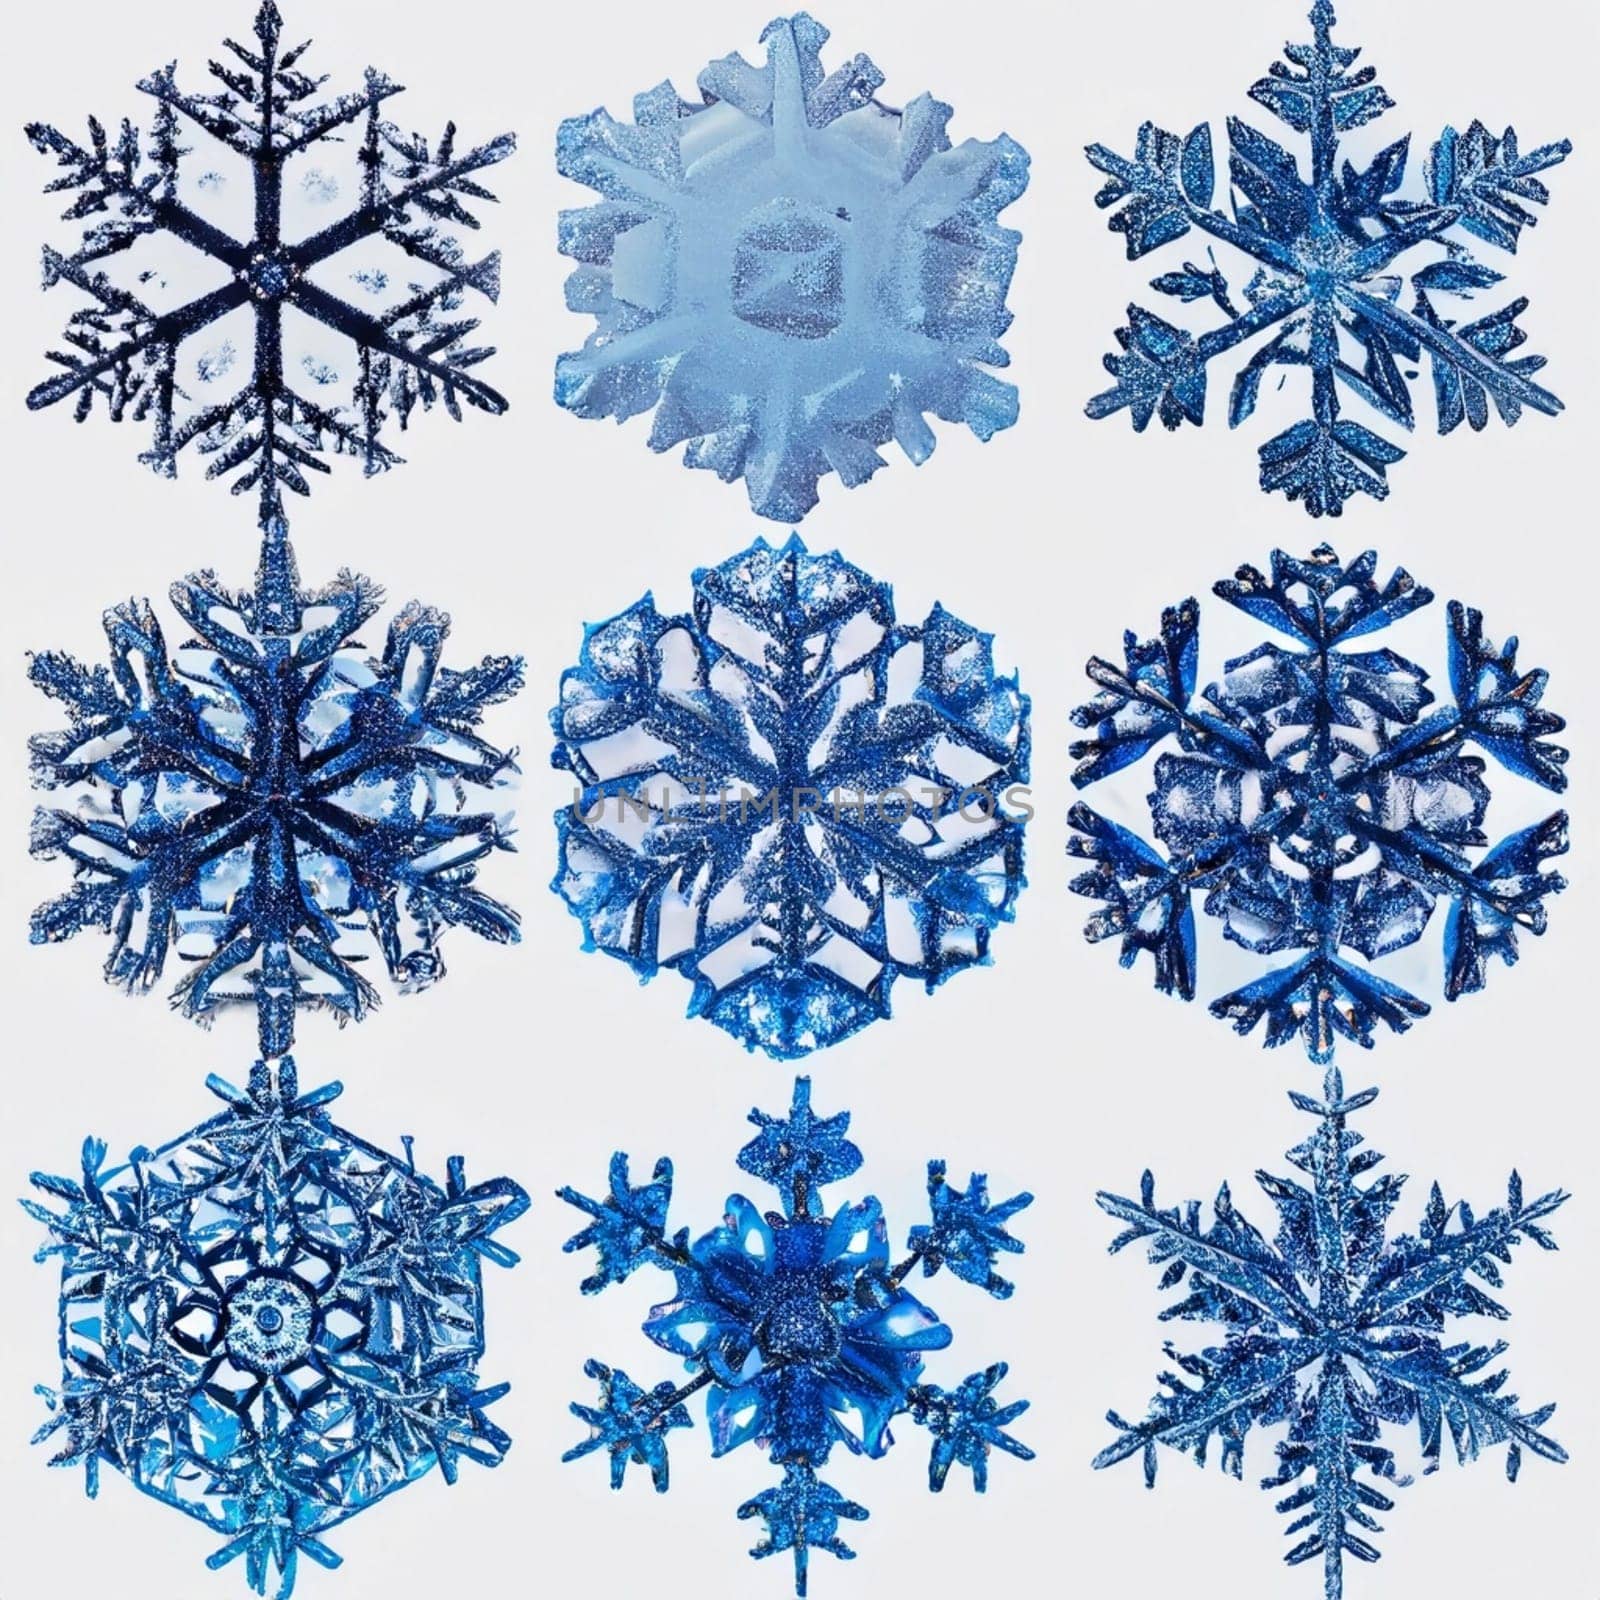 set of snowflakes. global colors used. elements grouped. Snowflake Decoration Christmas Winter set of snowflakes features unique and intricate designs, capturing the beauty and wonder of winter. High quality image